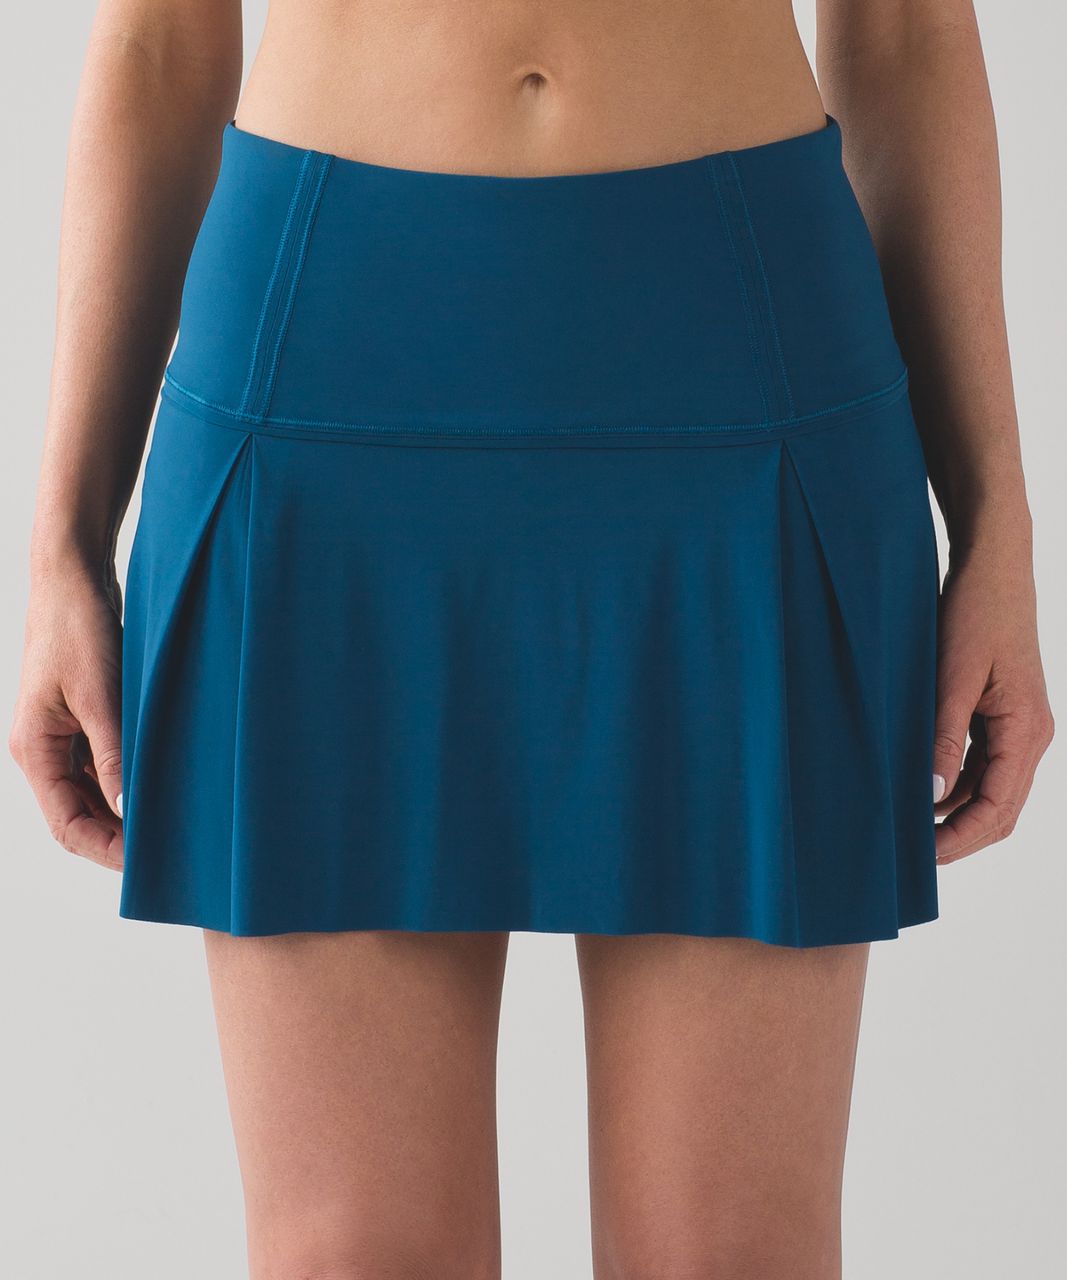 lost in pace skirt